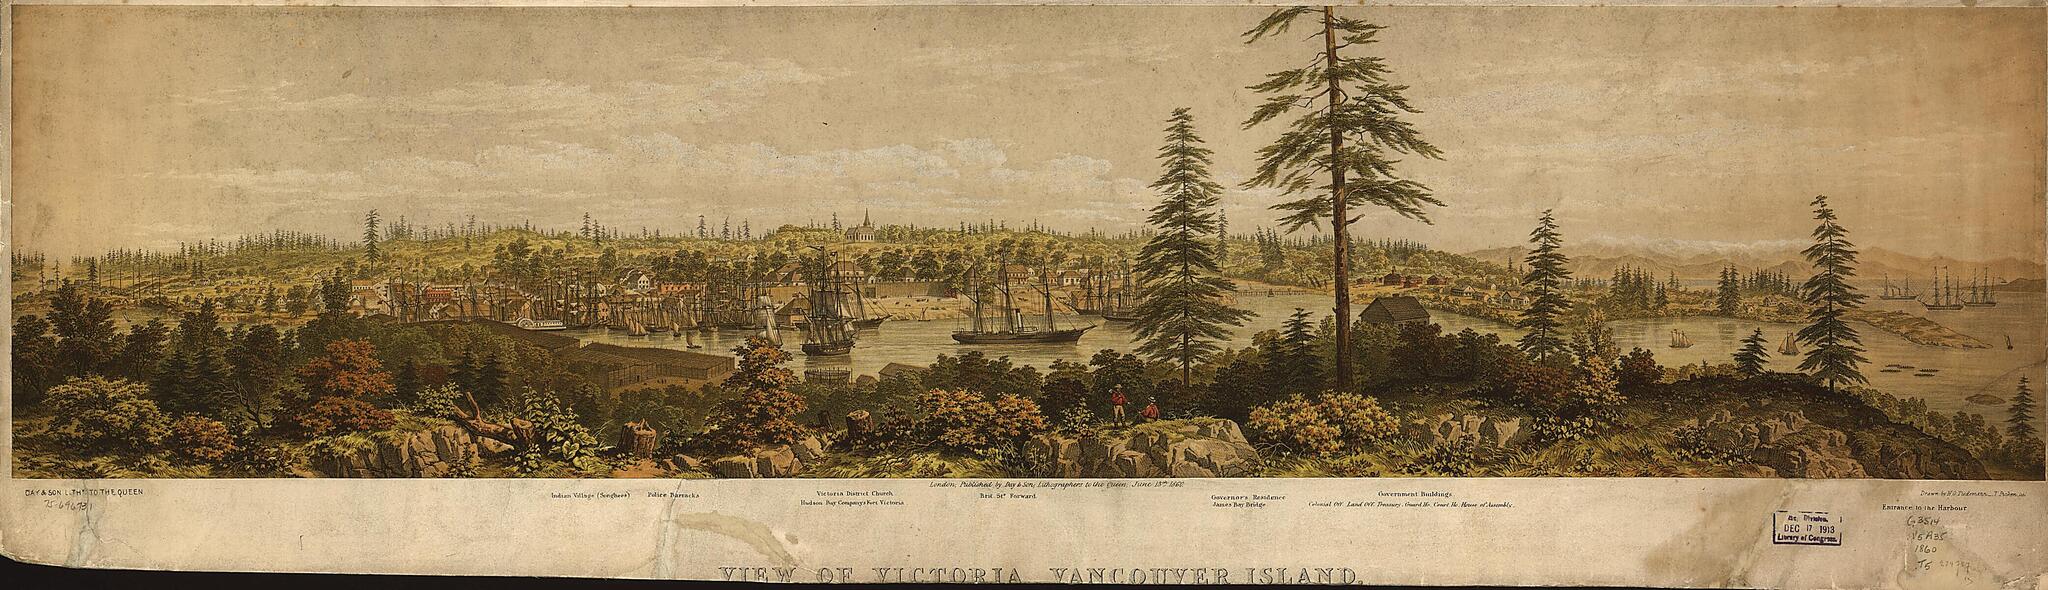 This old map of View of Victoria, Vancouver Island from 1860 was created by  Day &amp; Son, Thomas Picken, H. O. Tiedemann in 1860